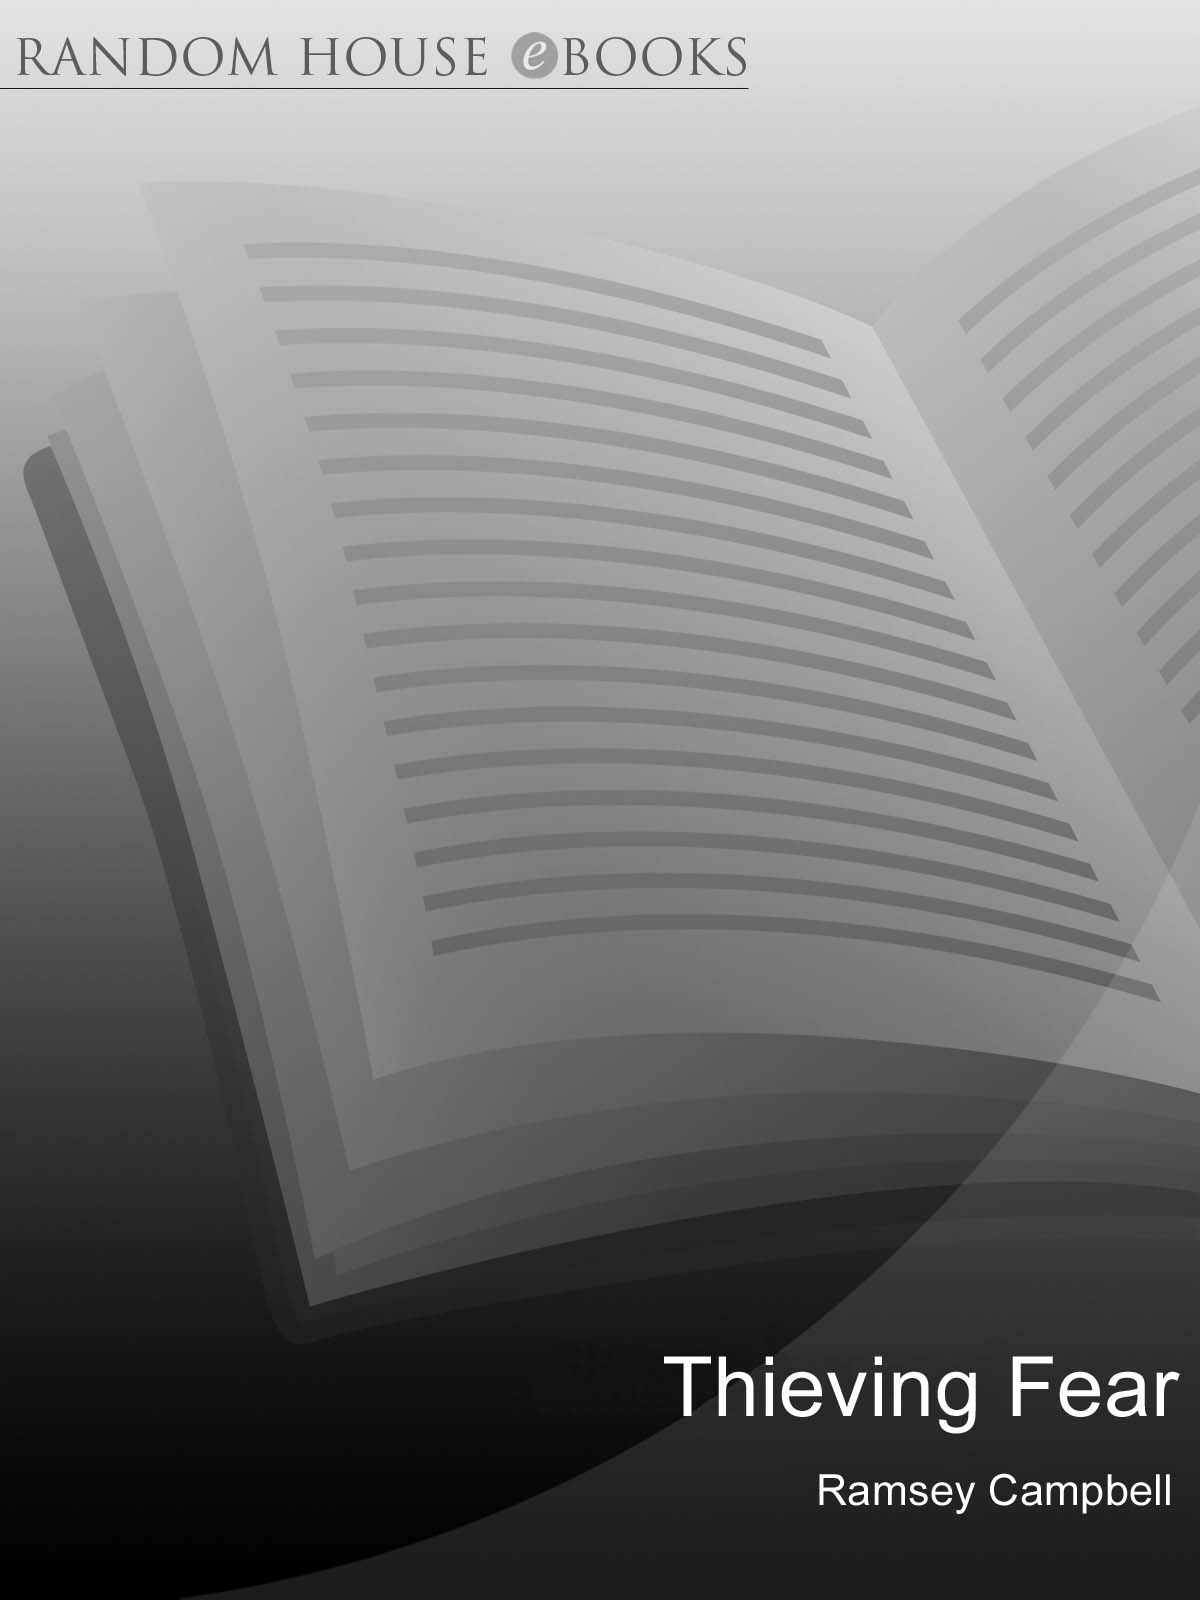 Thieving Fear by Ramsey Campbell